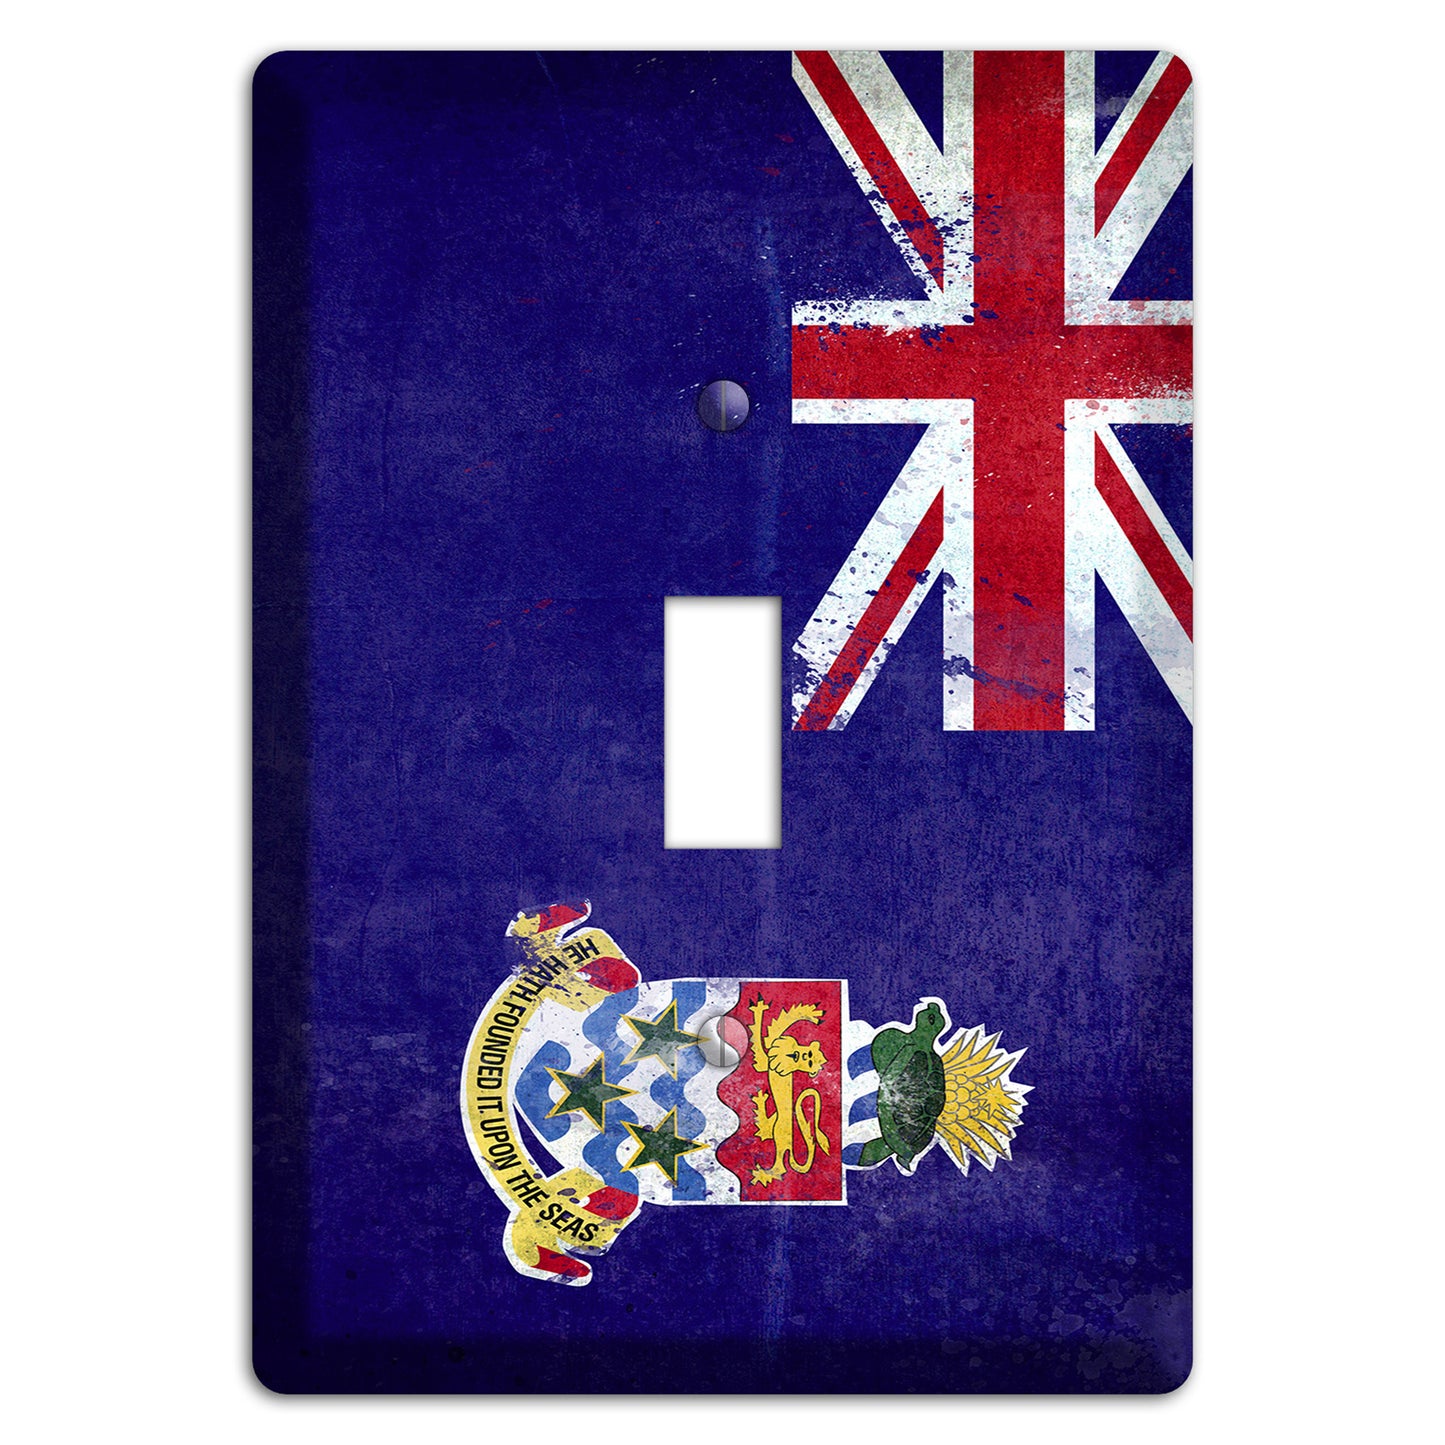 Caiman Island Cover Plates Cover Plates